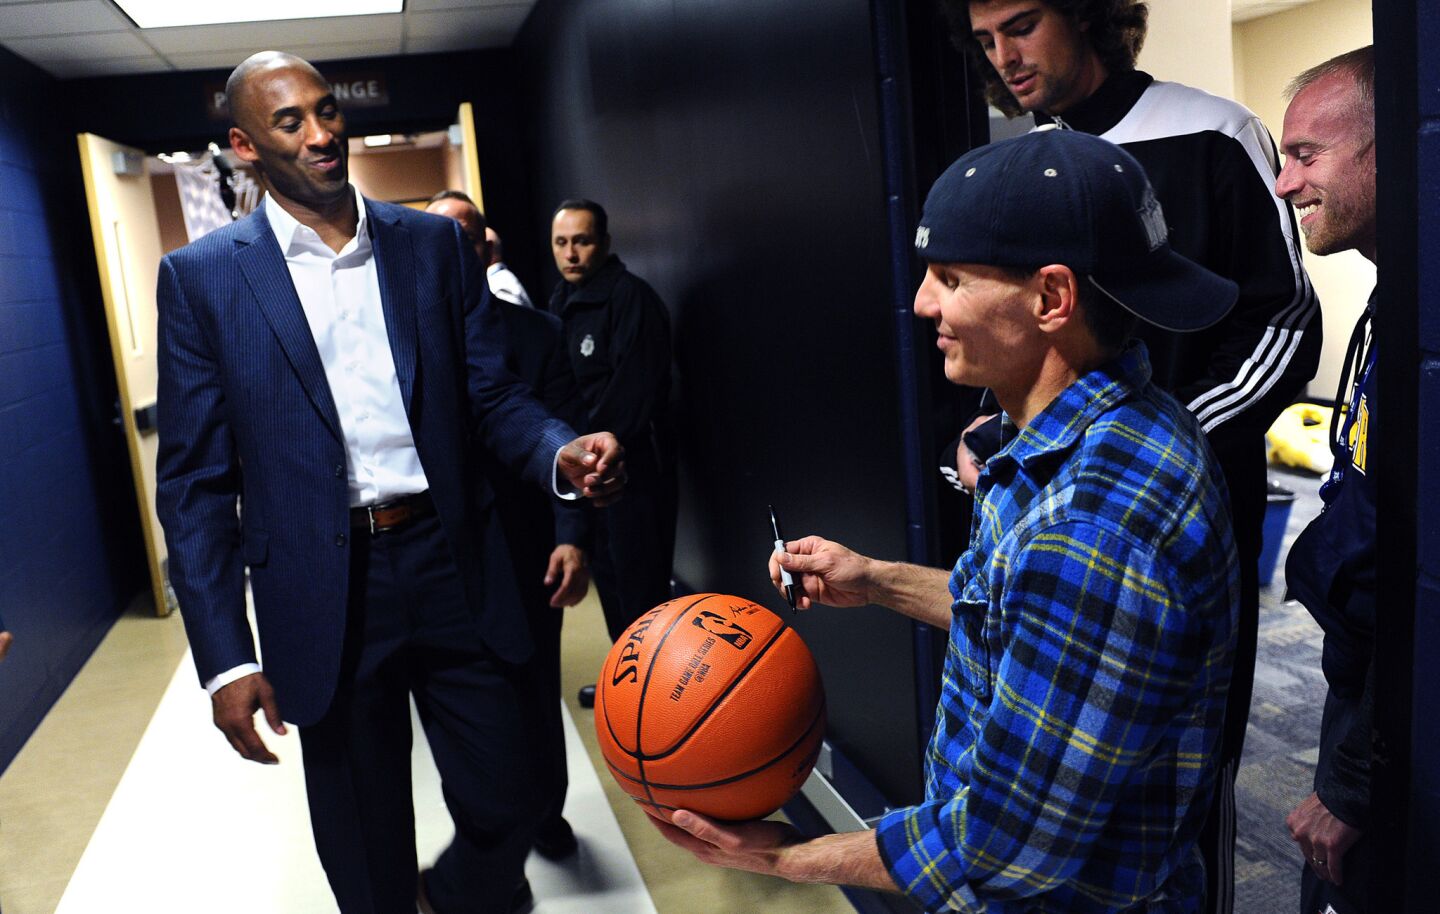 Kobe Bryant prepares to sign an autograph for a fan at Pepsi Center after his last gamein Denver on March 2, 2016.